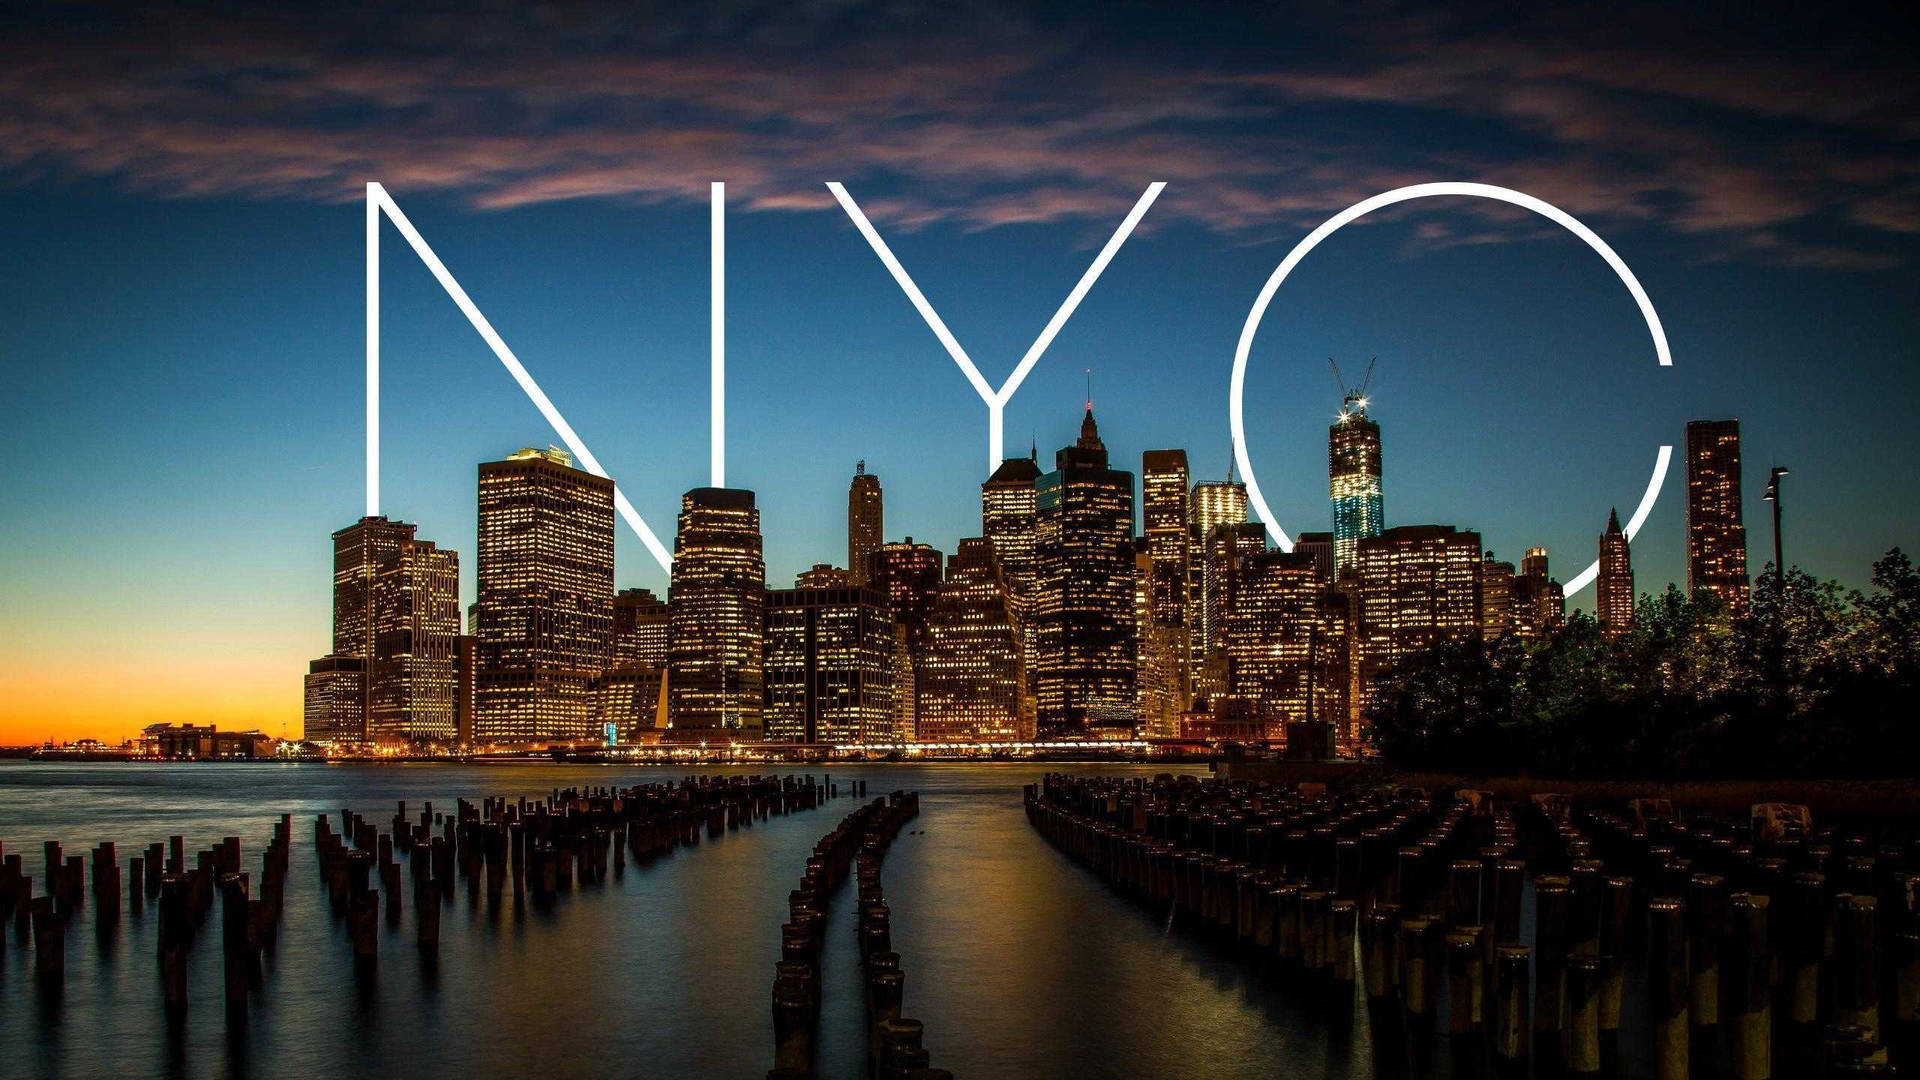 New York City With Nyc Text